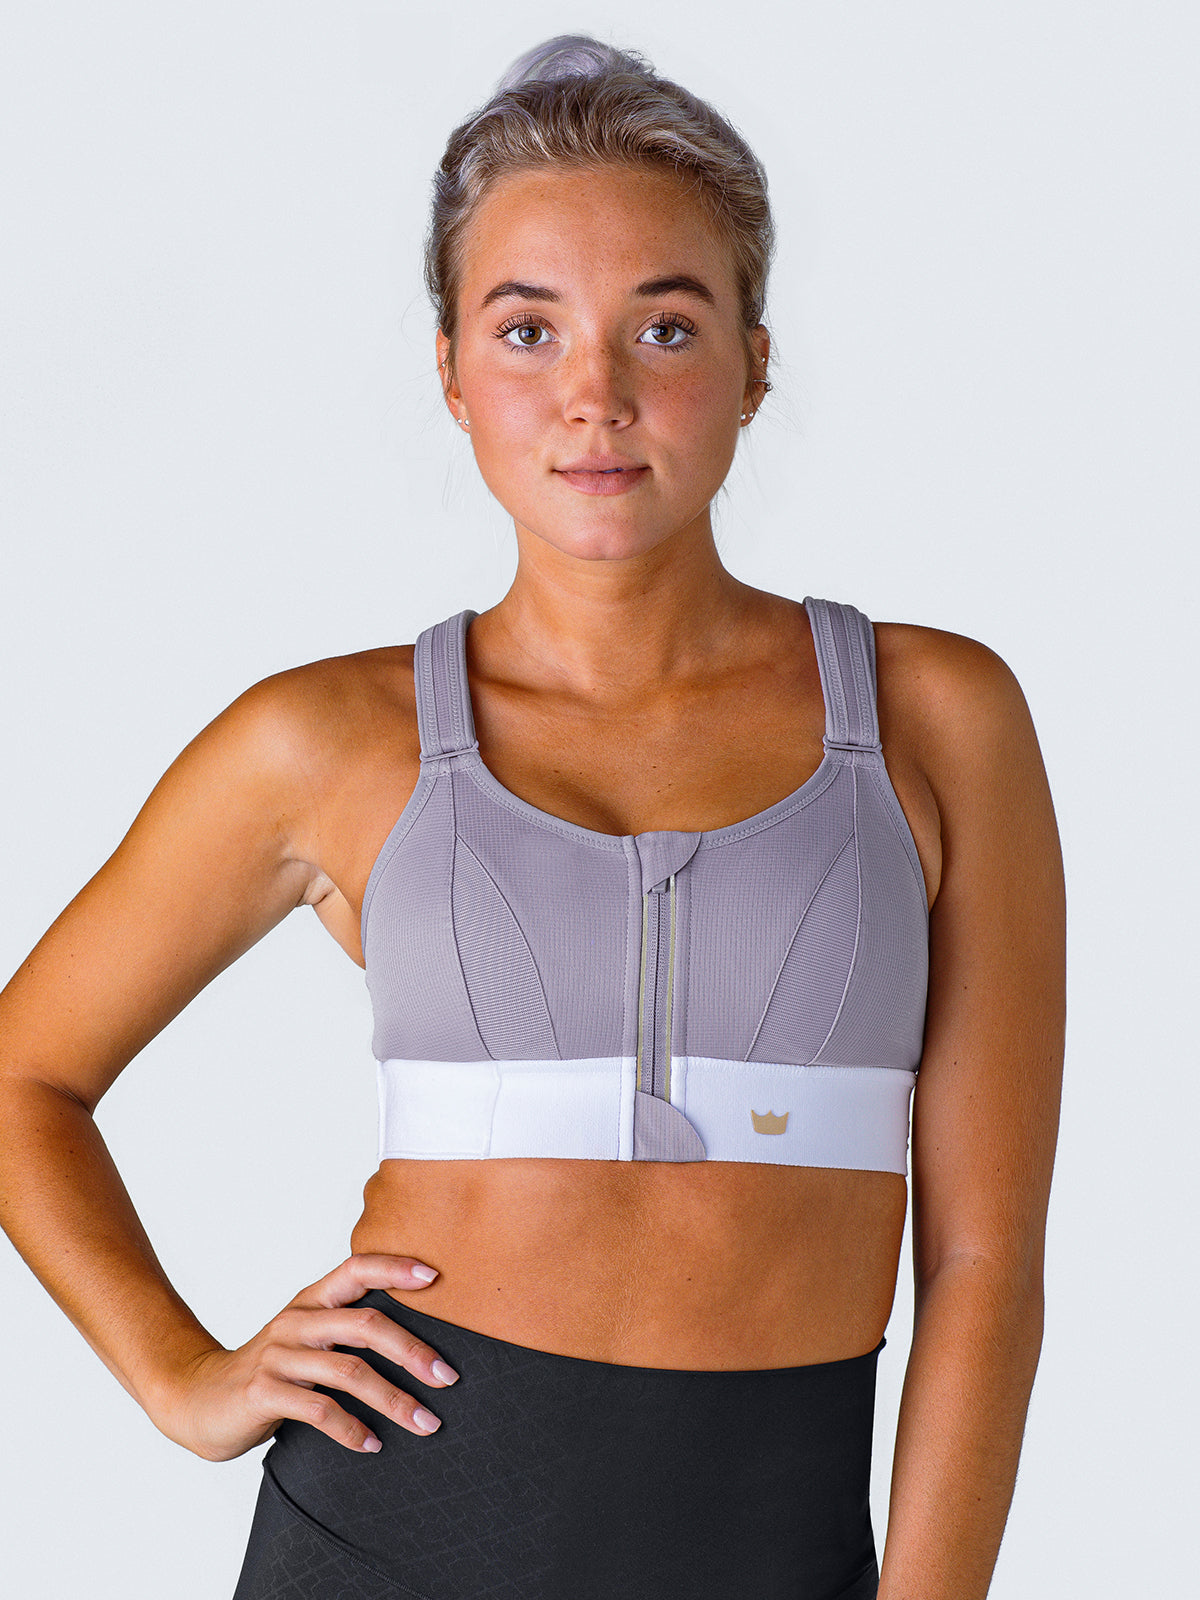 The Shefit Ultimate Sports Bra Provides Lab-Proven Support